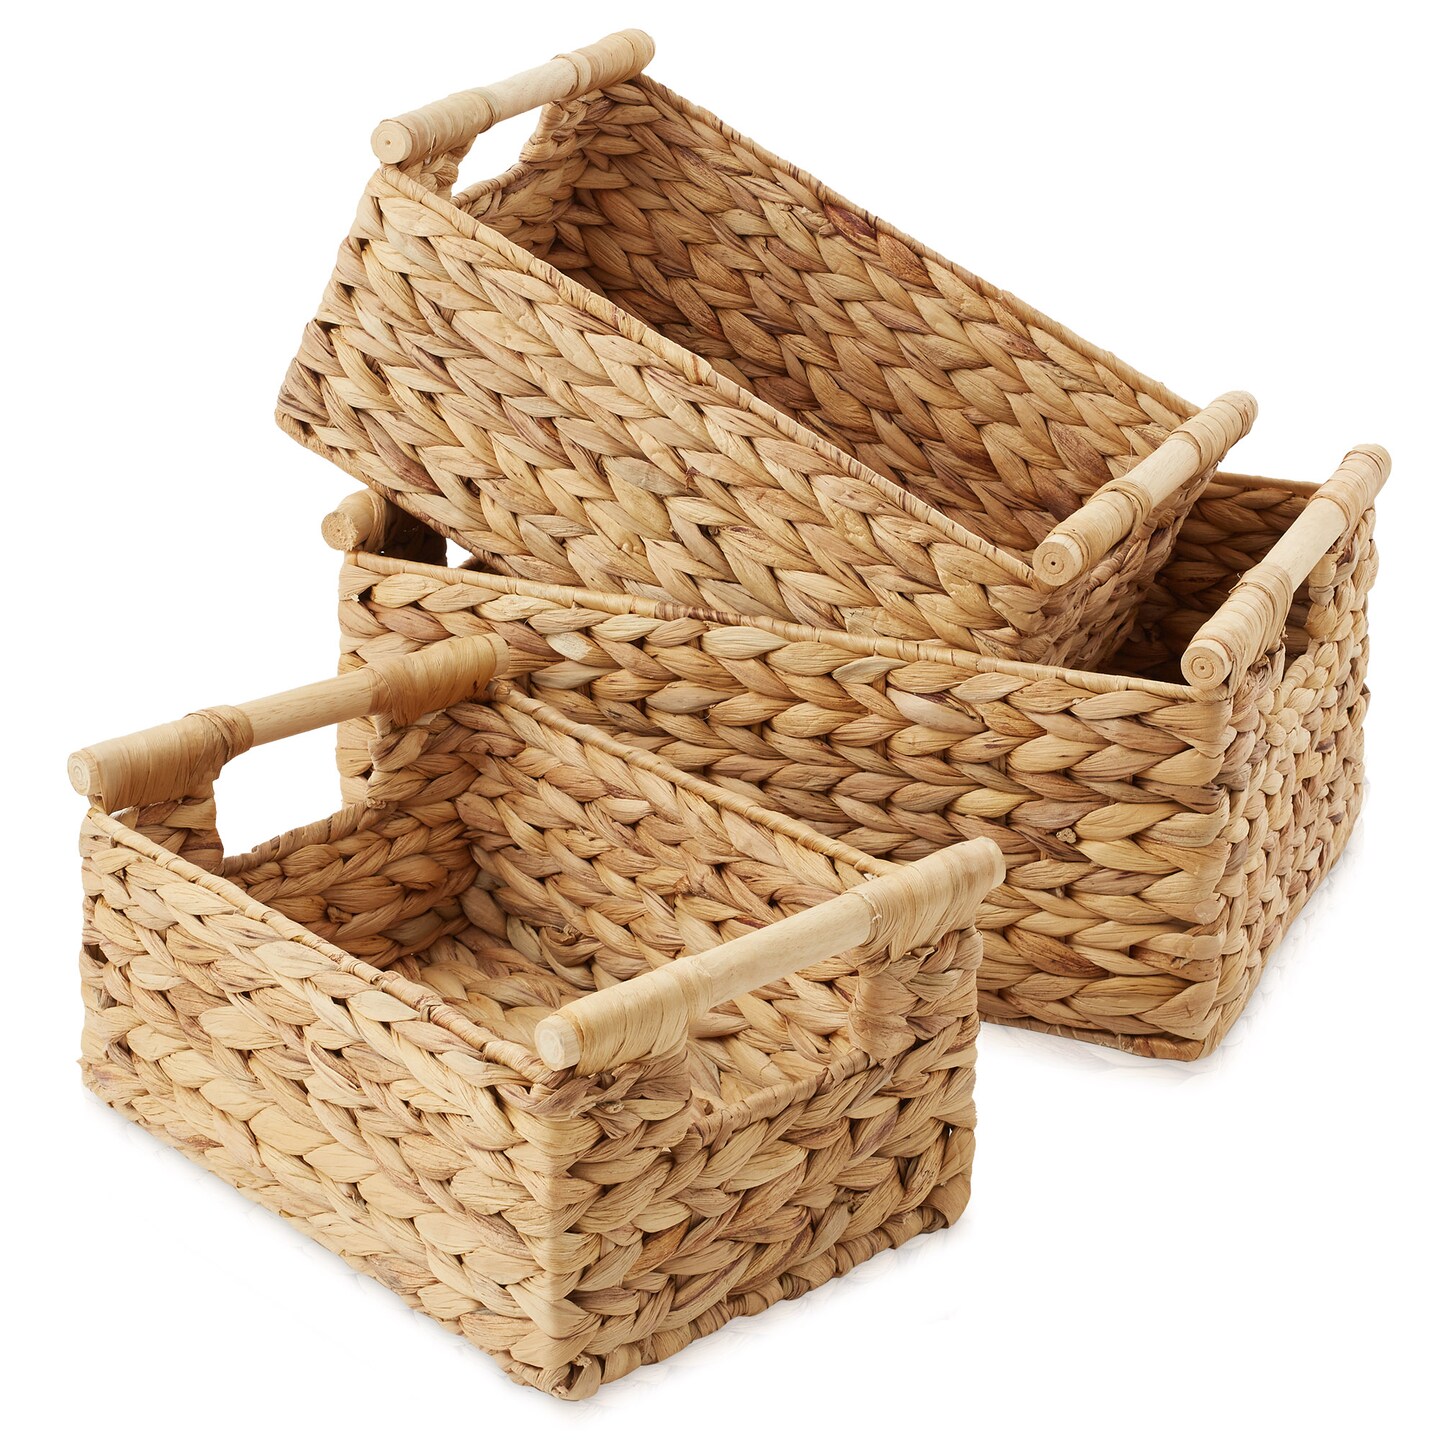 Casafield Set of 3 Water Hyacinth Rectangular Storage Baskets with Wooden Handles - Small, Medium, and Large Woven Nesting Baskets for Organizing